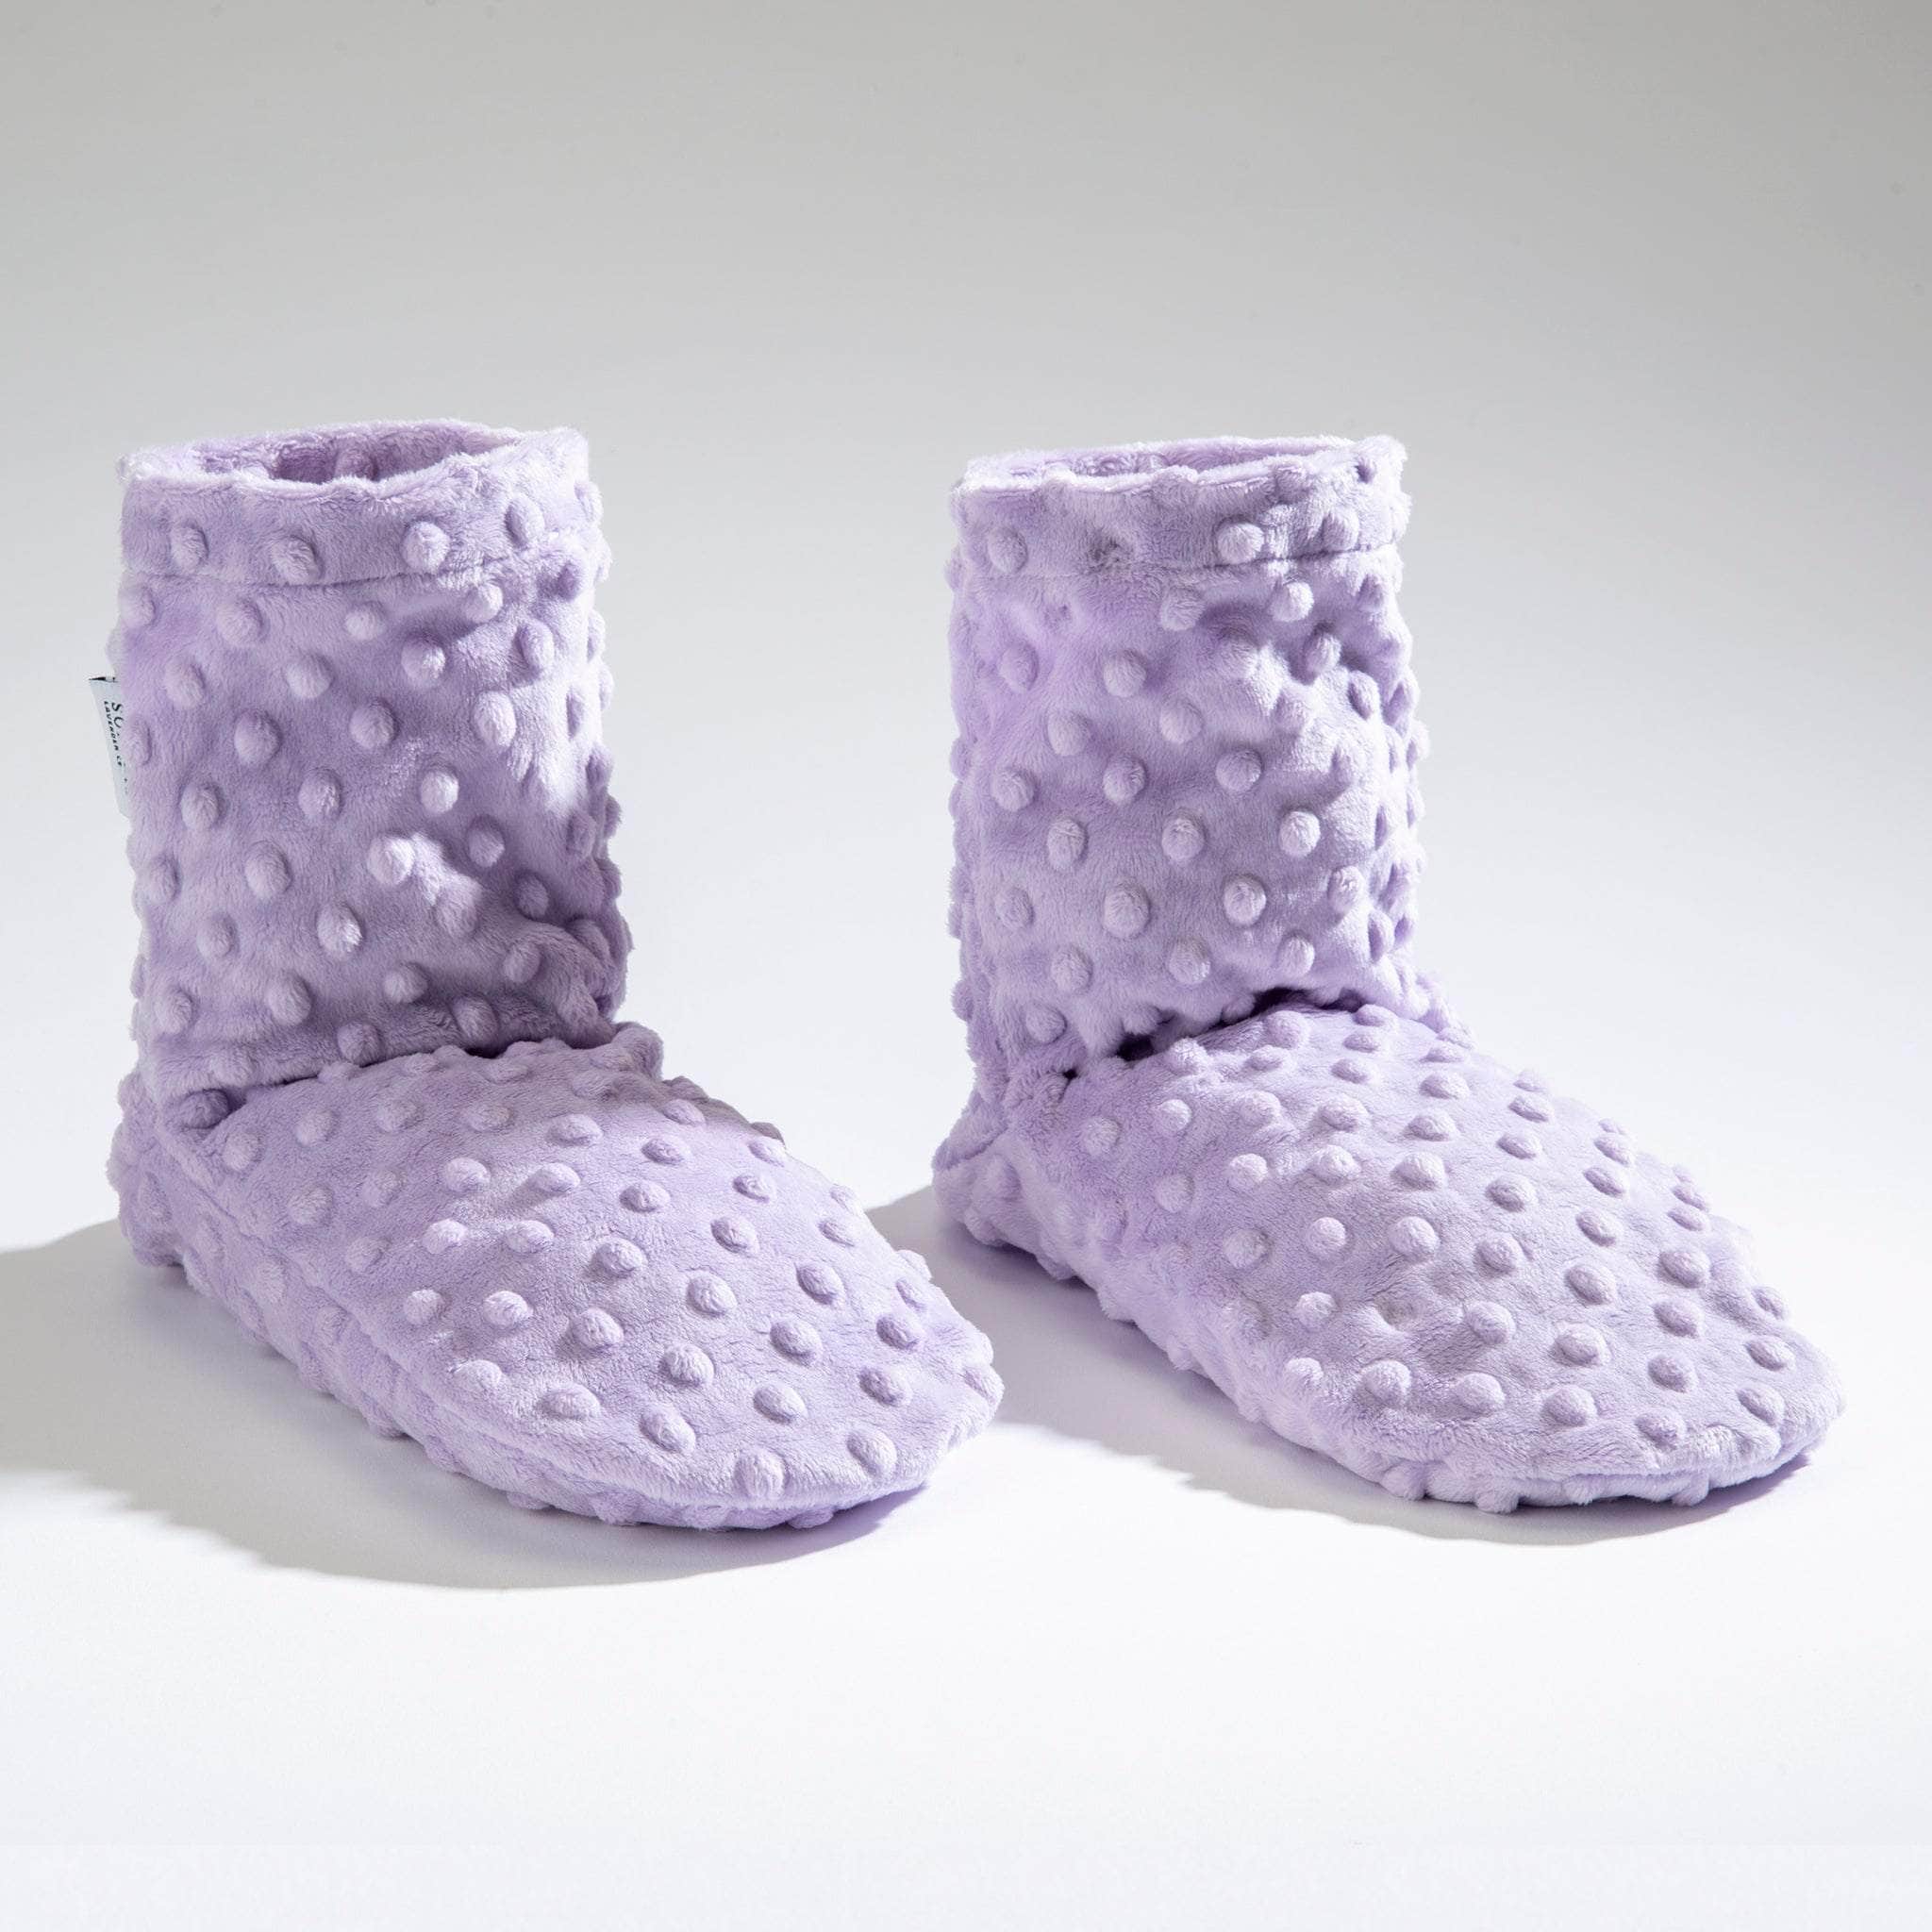 Lavender Spa Booties in Classic Lilac Dot Fabric